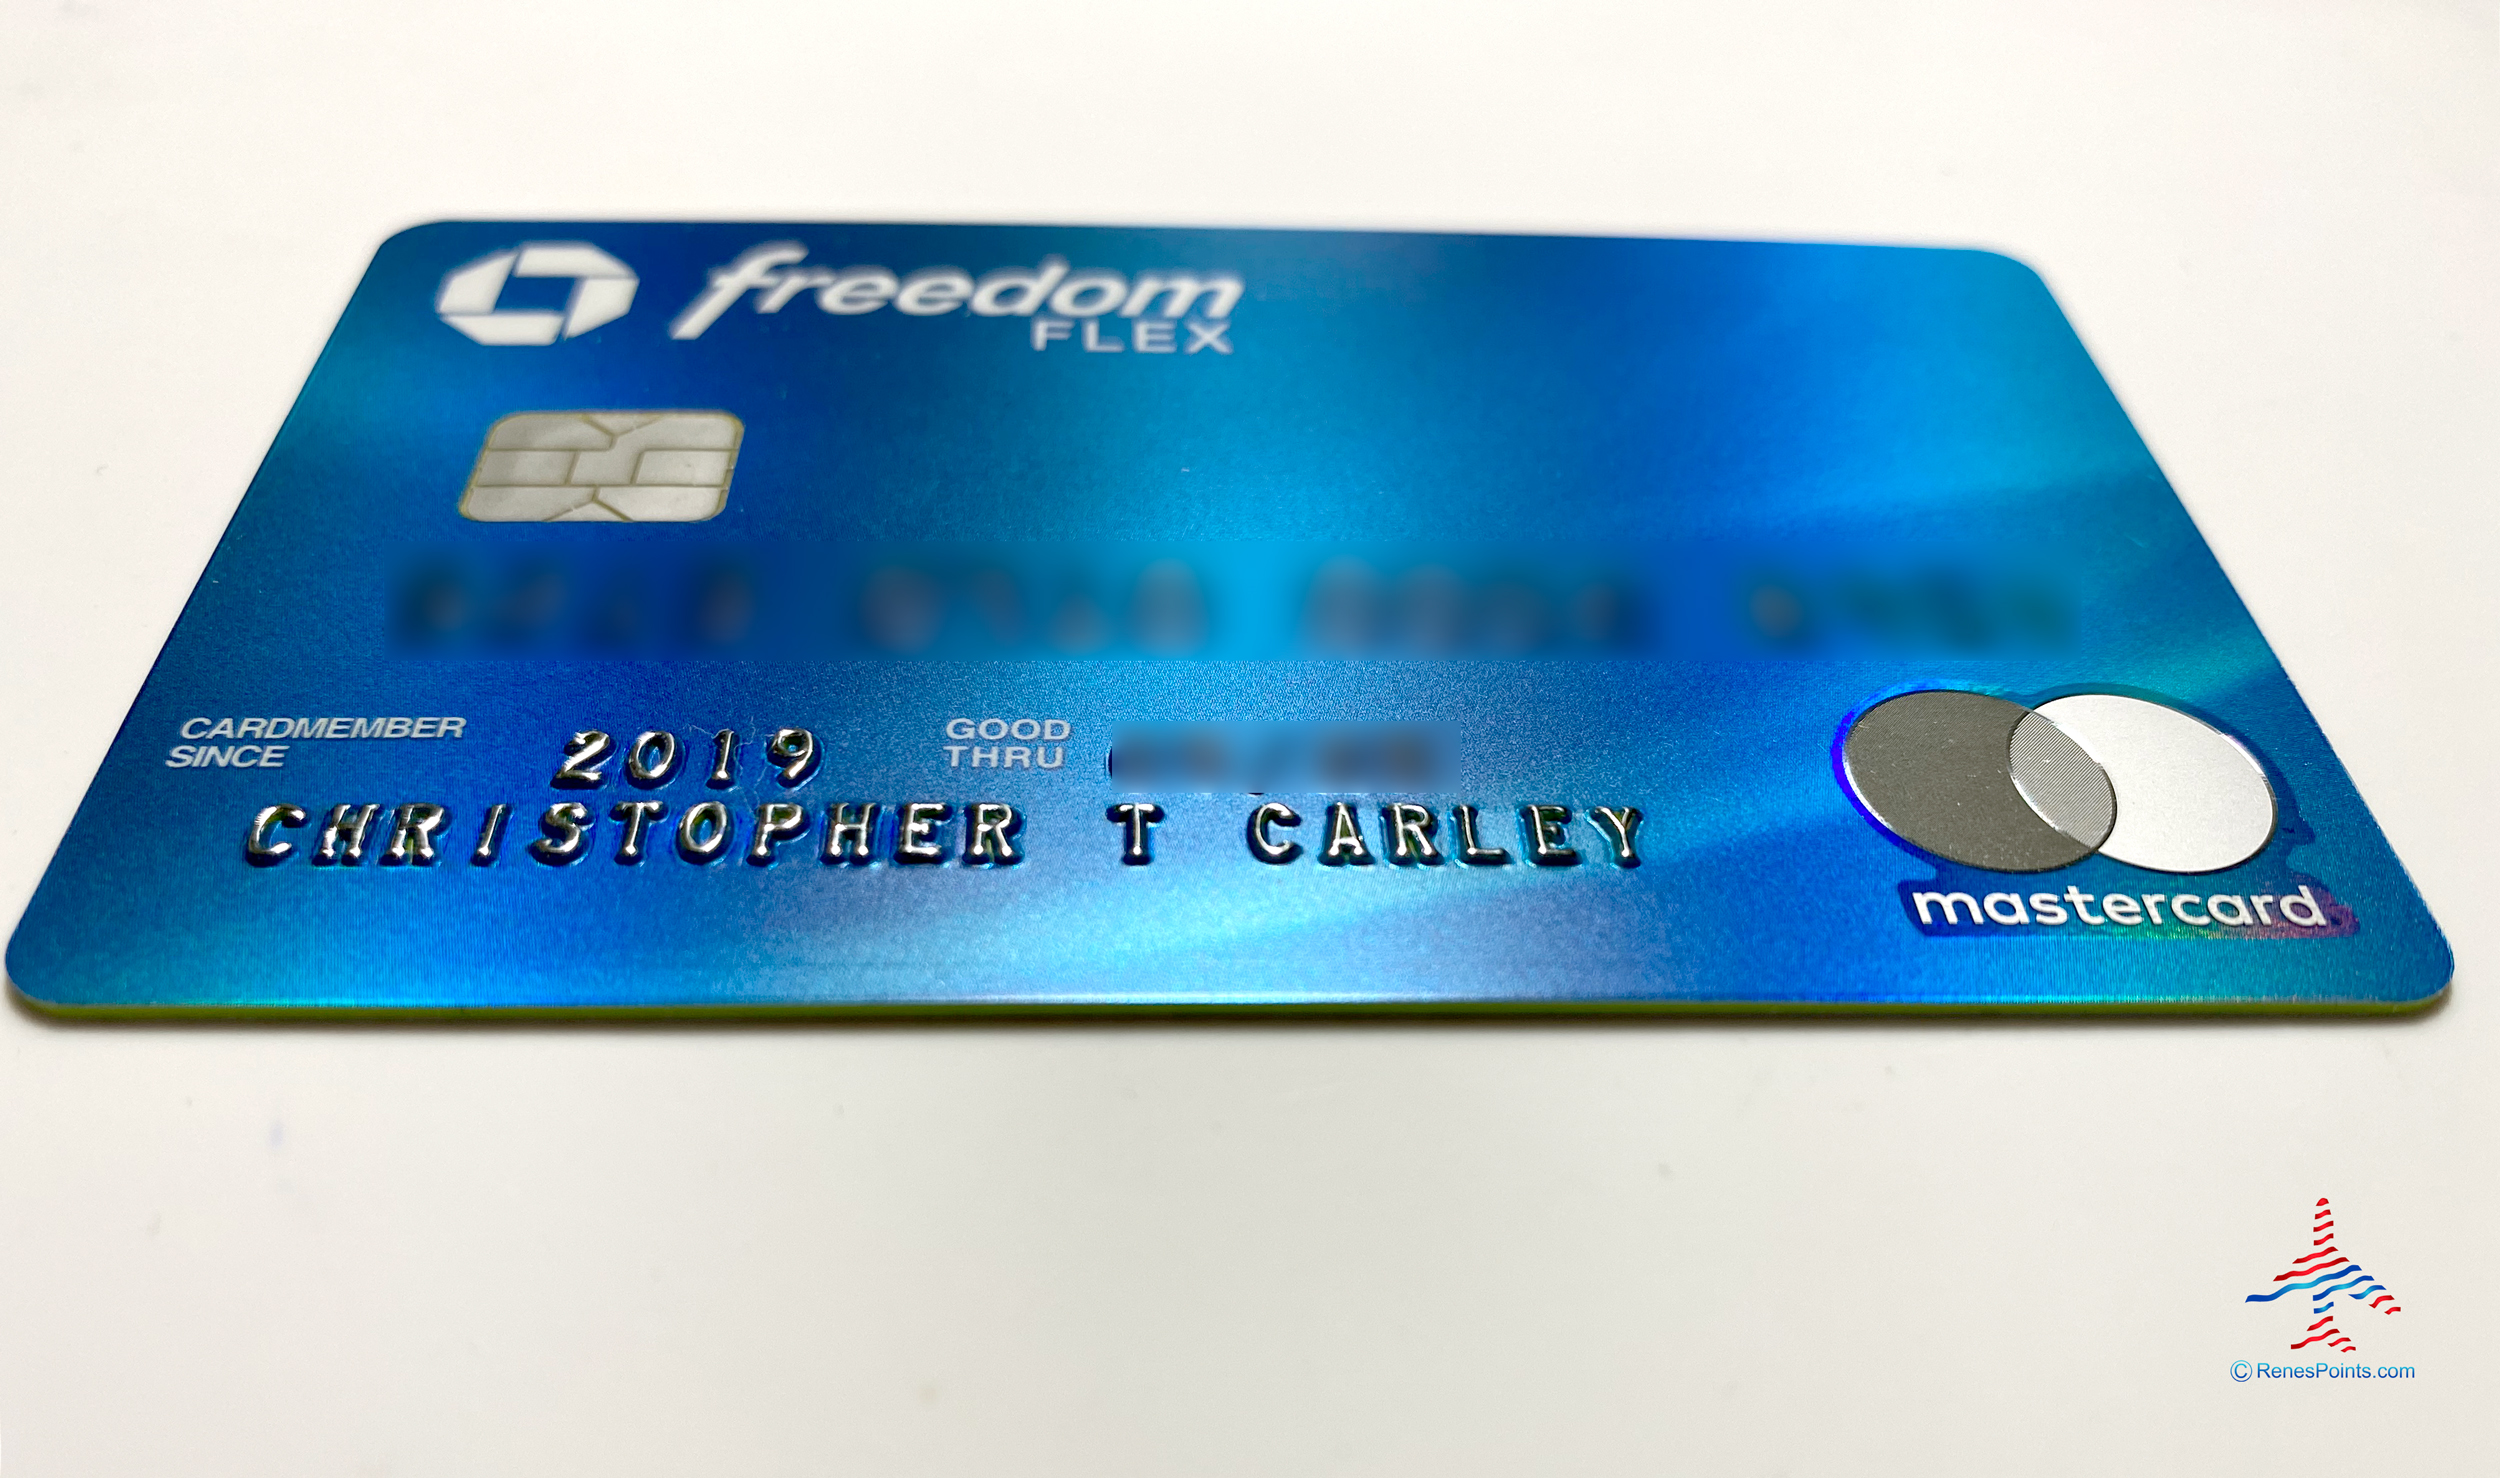 Learn how to apply for the Chase Freedom Flex℠ card